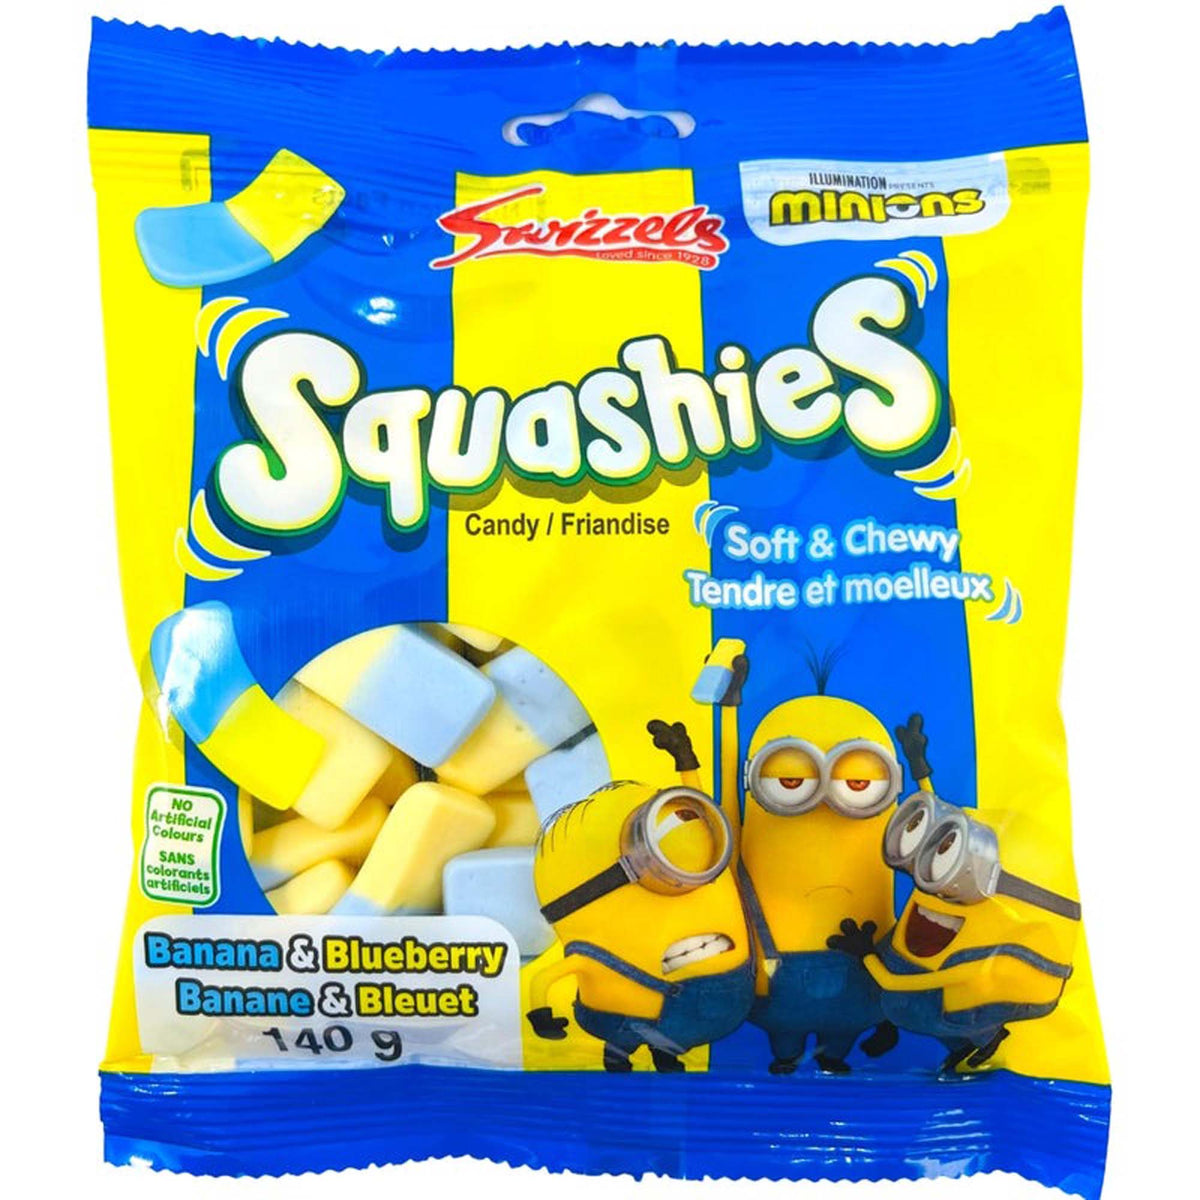 REGAL CONFECTION INC. Candy Minions Squashies Candies, 140g, 1 Count